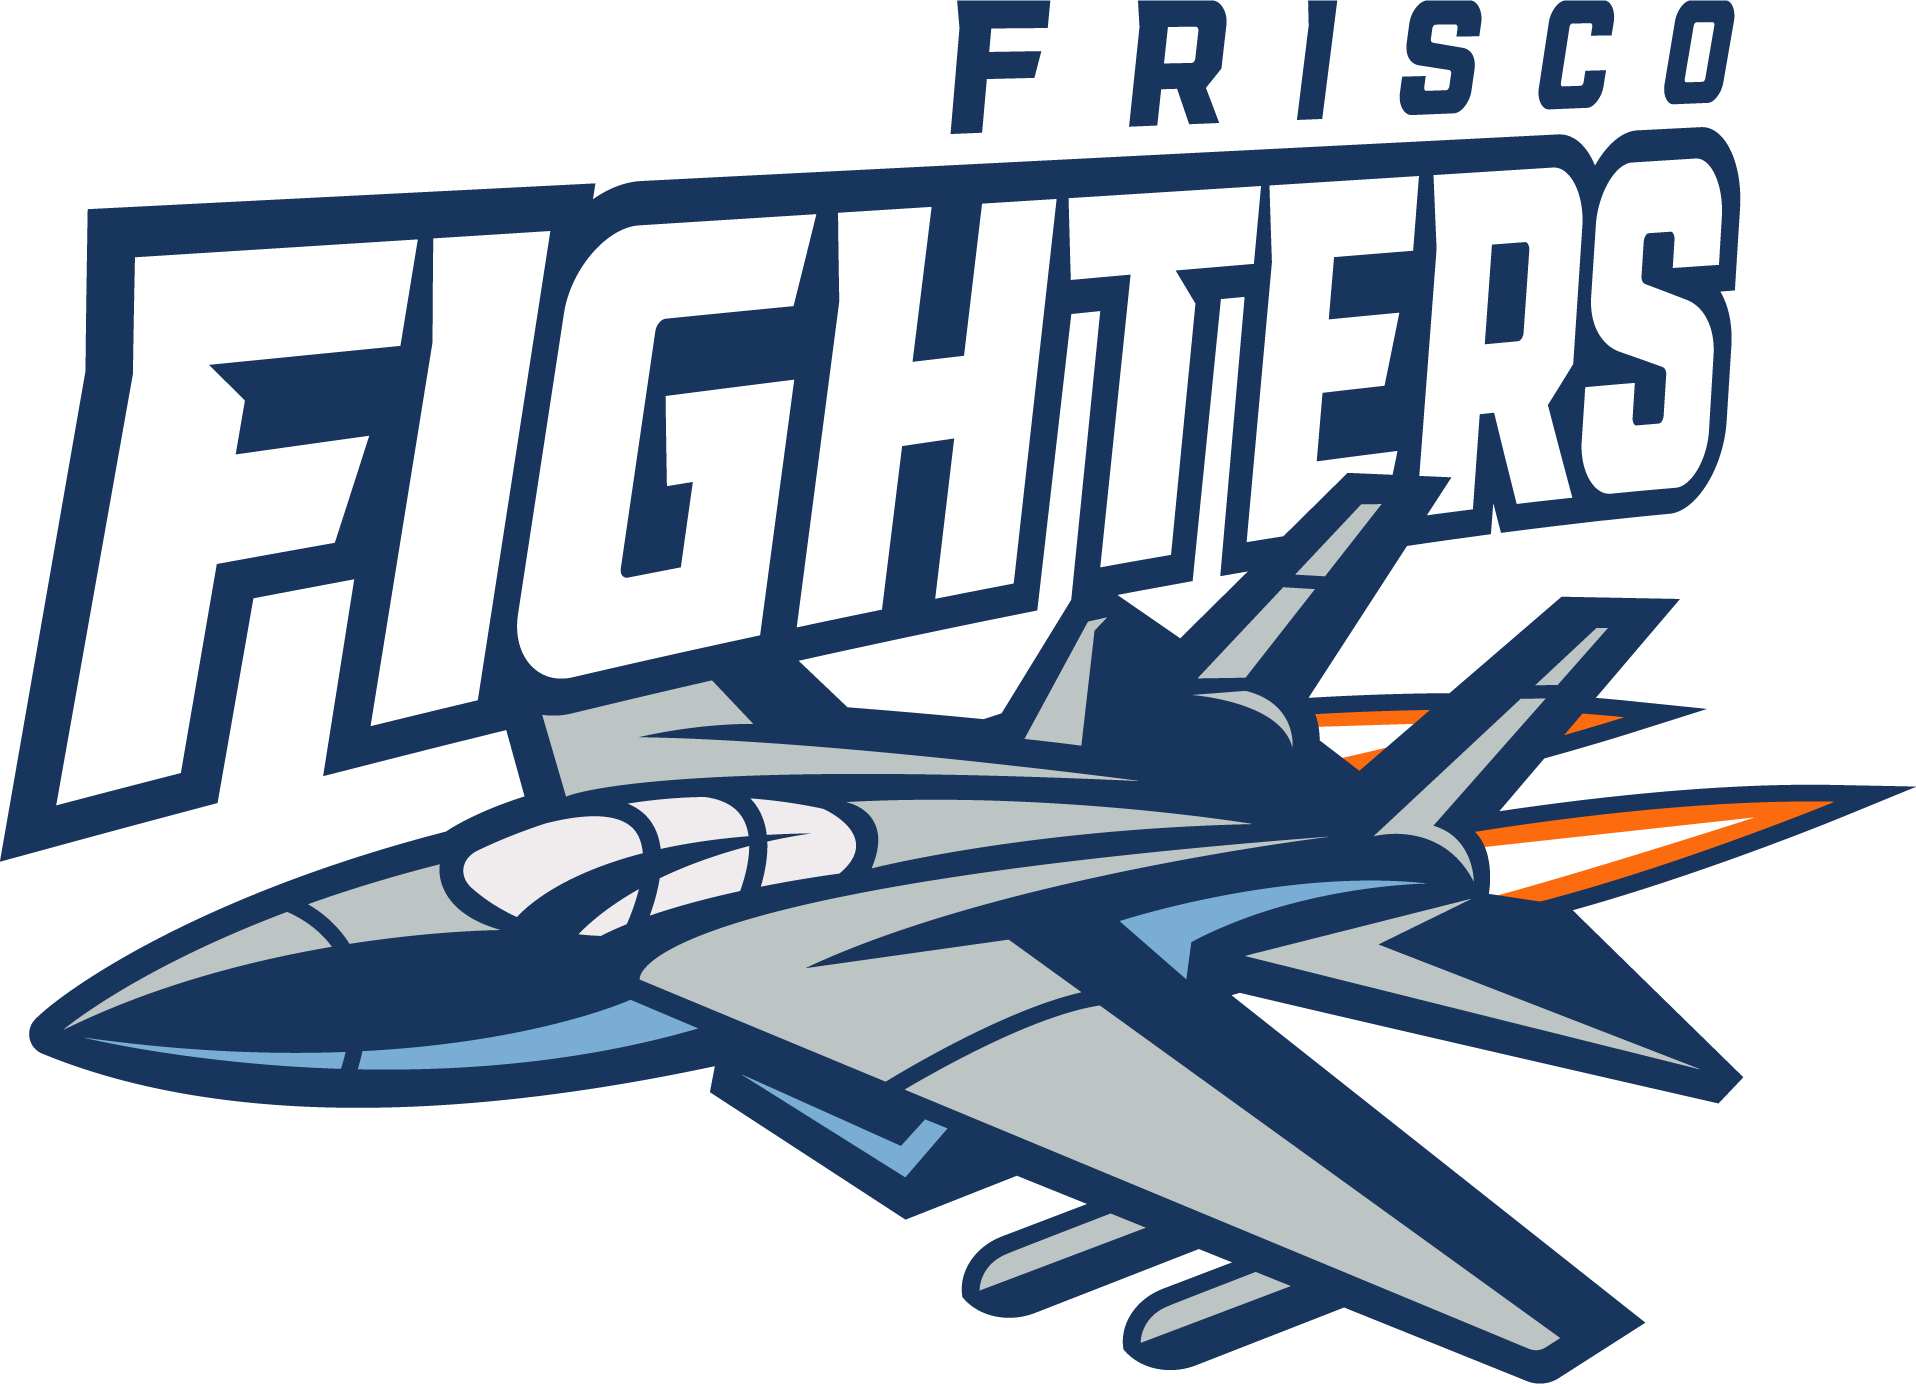 Fighters-Primary-FC-WhiteBkgd-NoTX2020.png